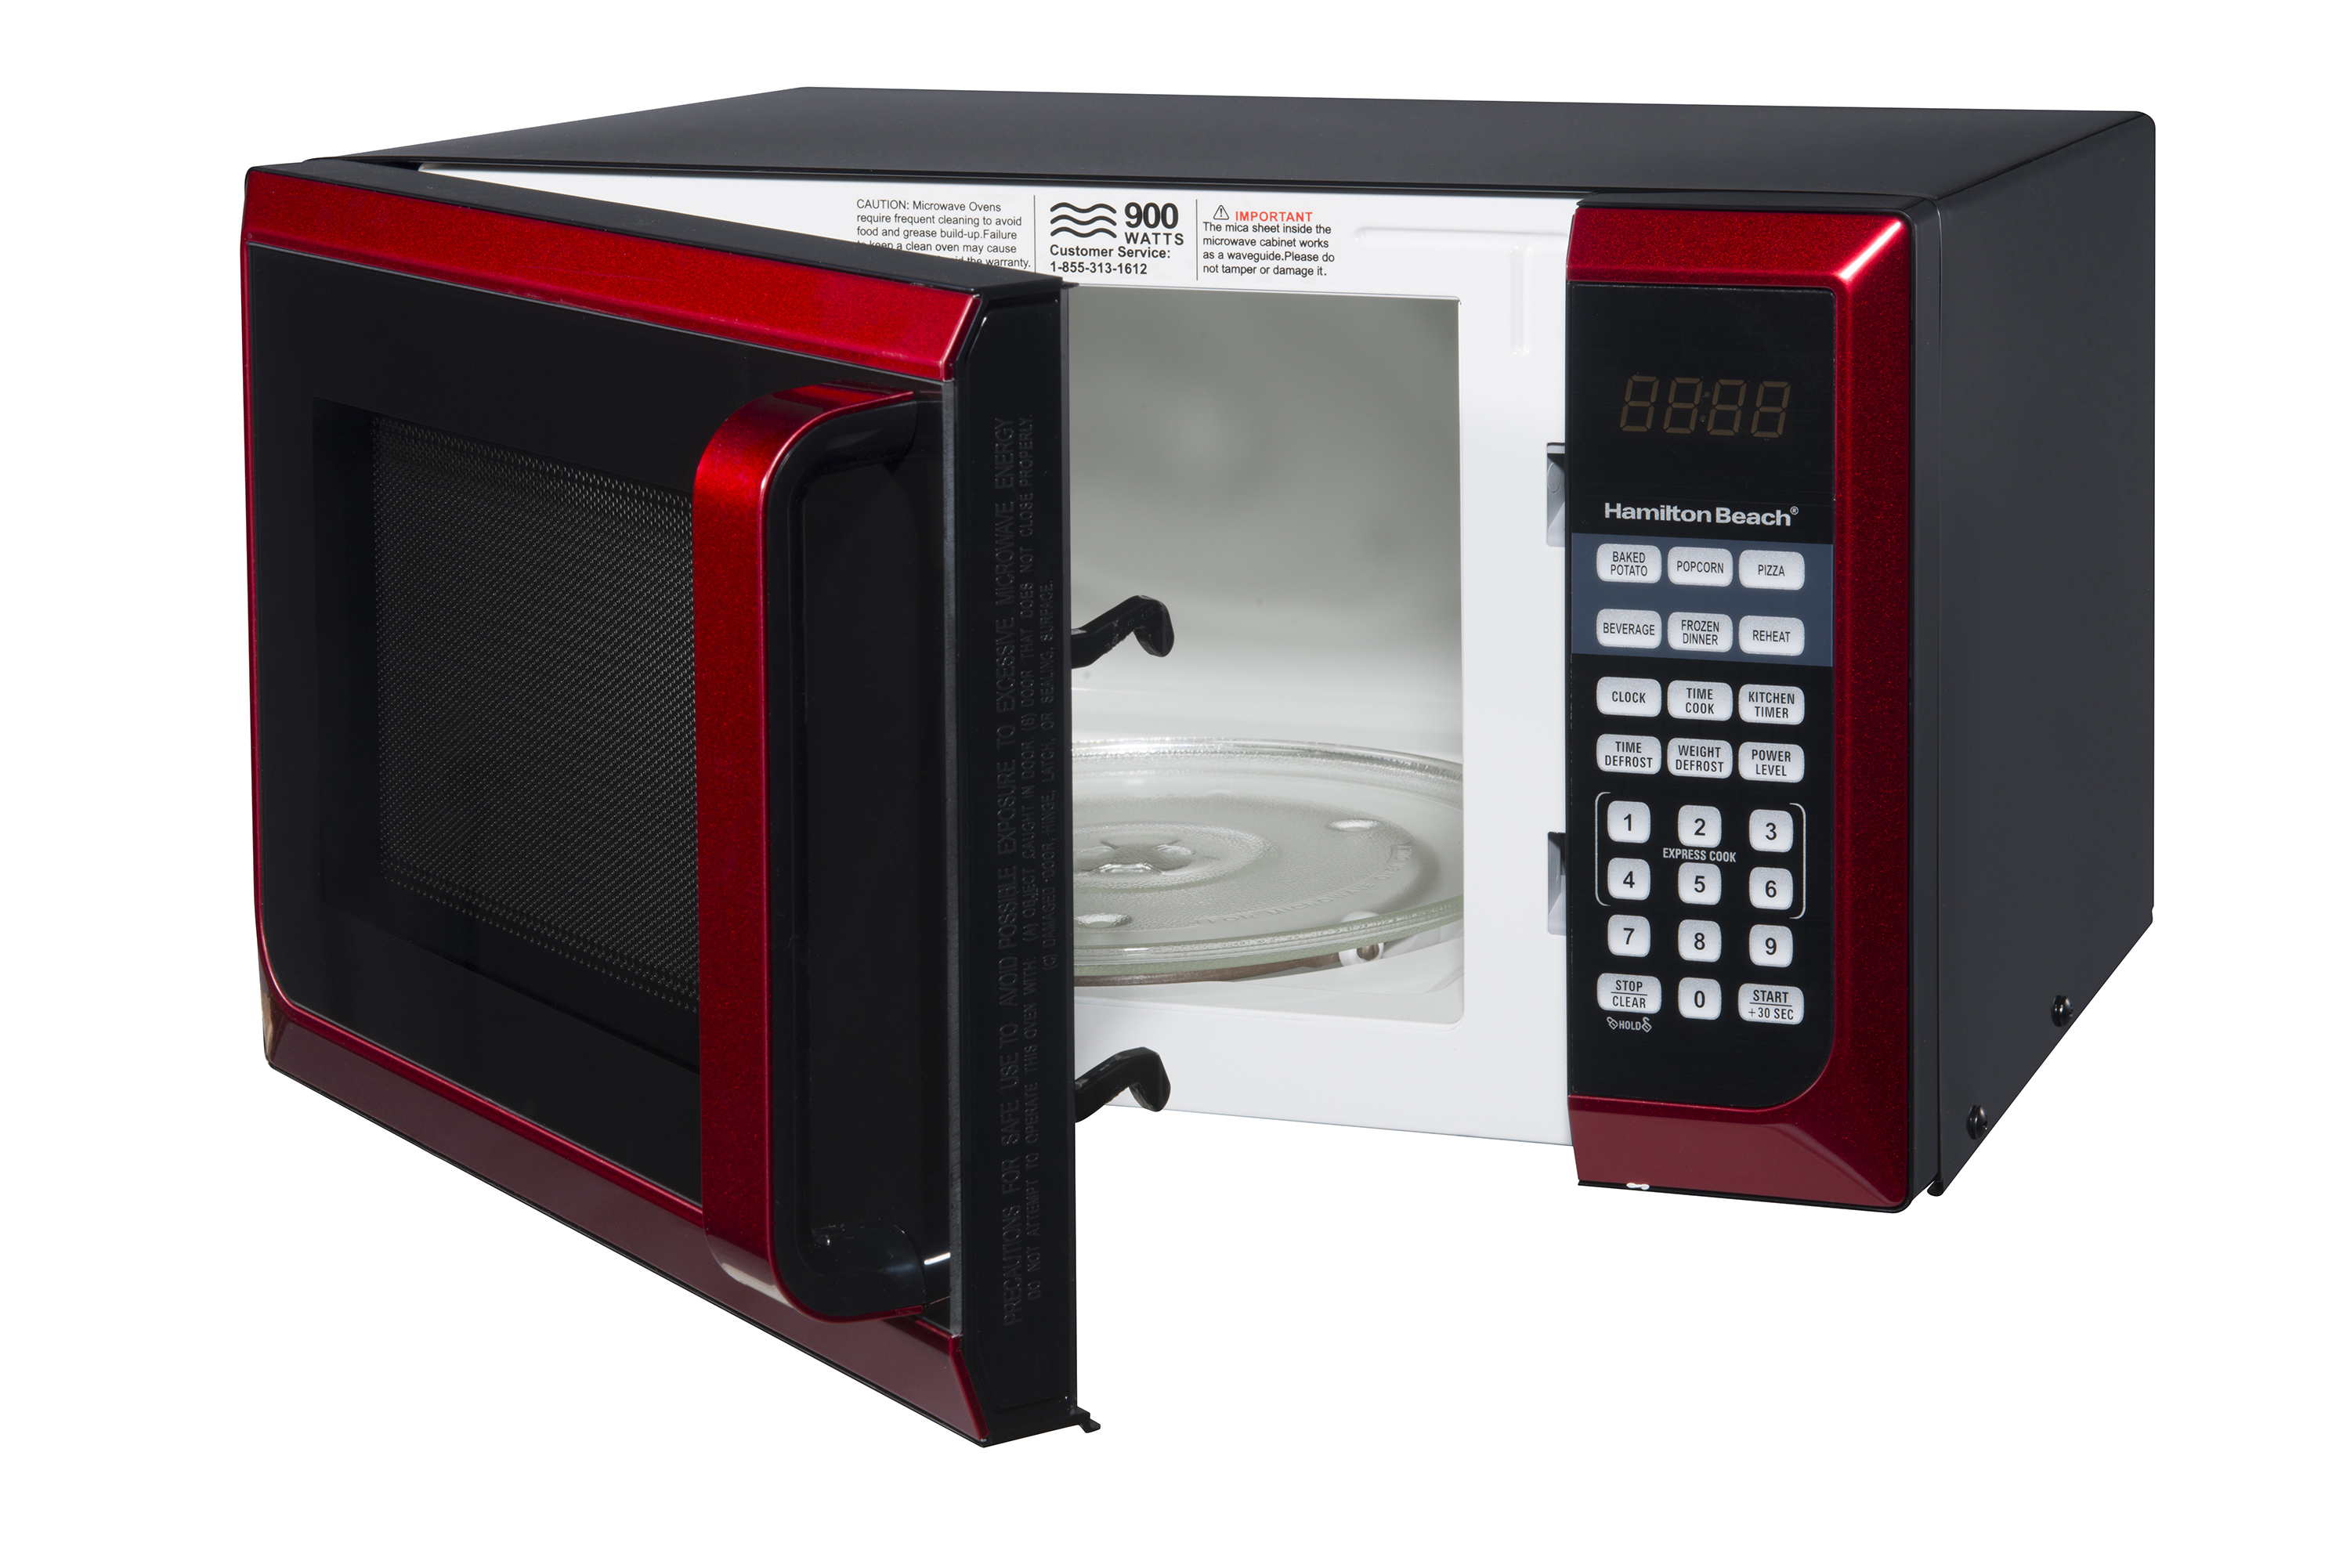 Hamilton Beach 0.9 cu. ft. Countertop Microwave Oven, 900 Watts, Red Stainless Steel - image 2 of 7